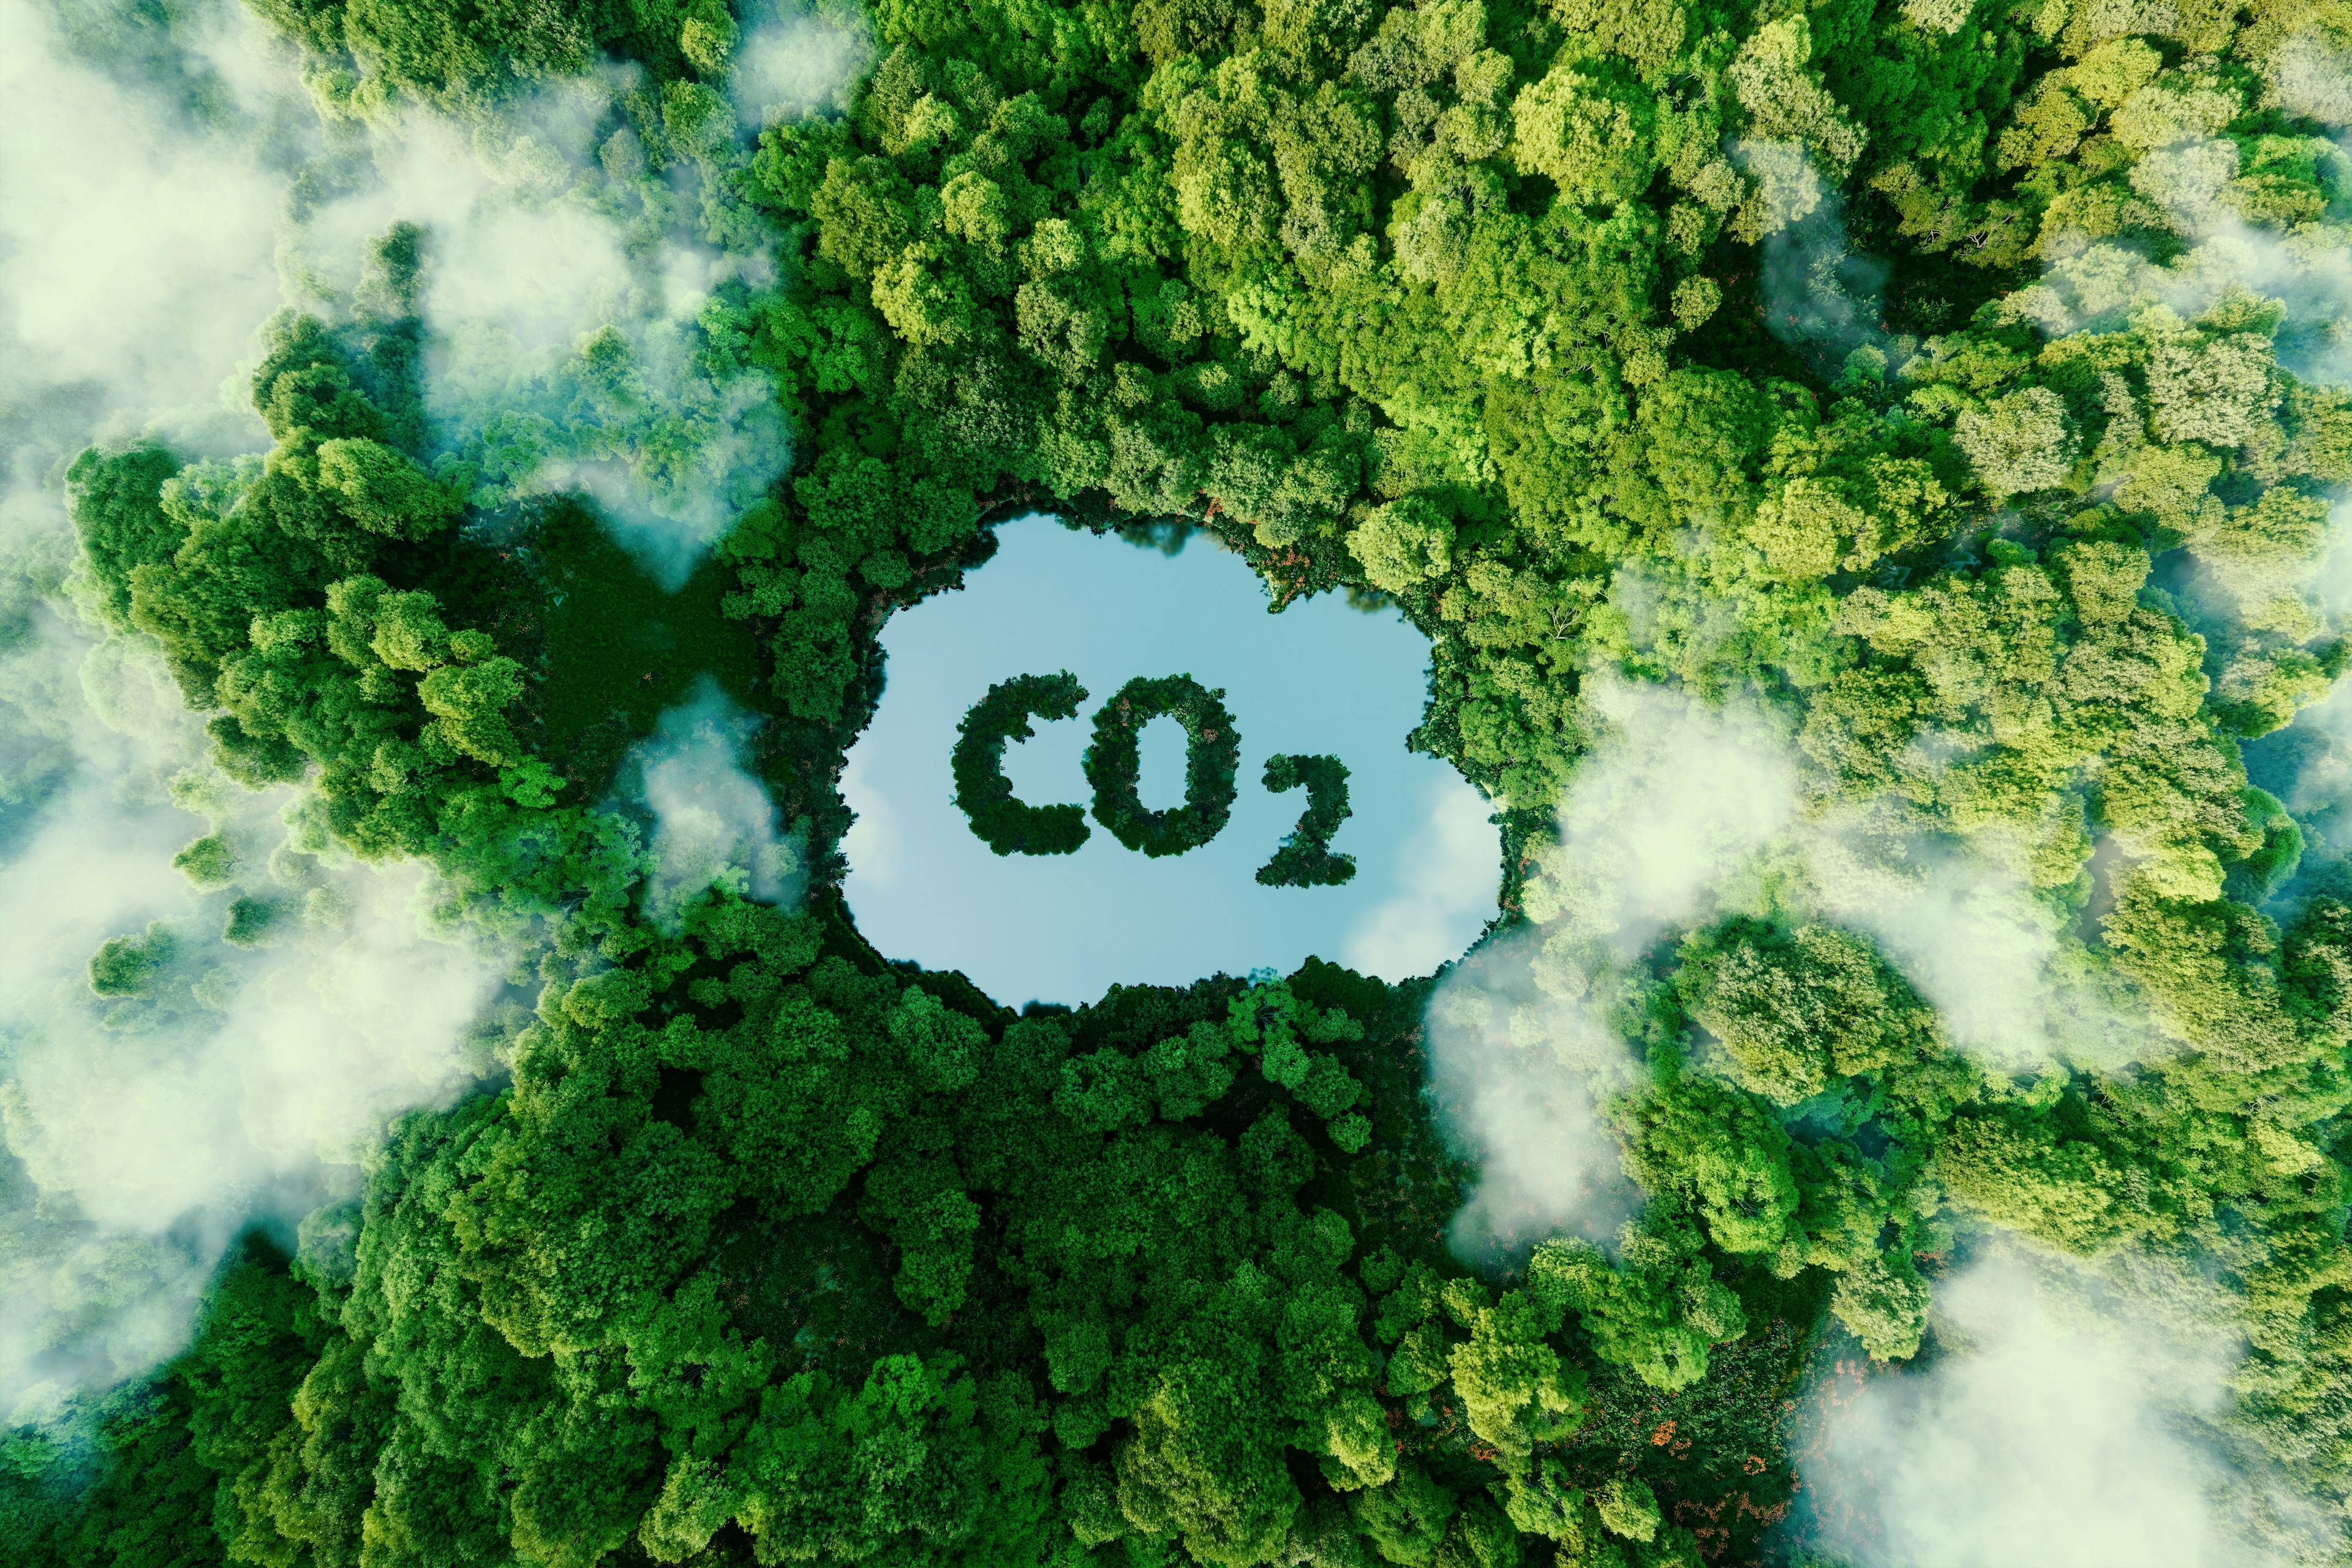 Concept depicting the issue of carbon dioxide emissions and its impact on nature in the form of a pond in the shape of a co2 symbol located in a lush forest. 3d rendering. | Image Credit: © malp - stock.adobe.com